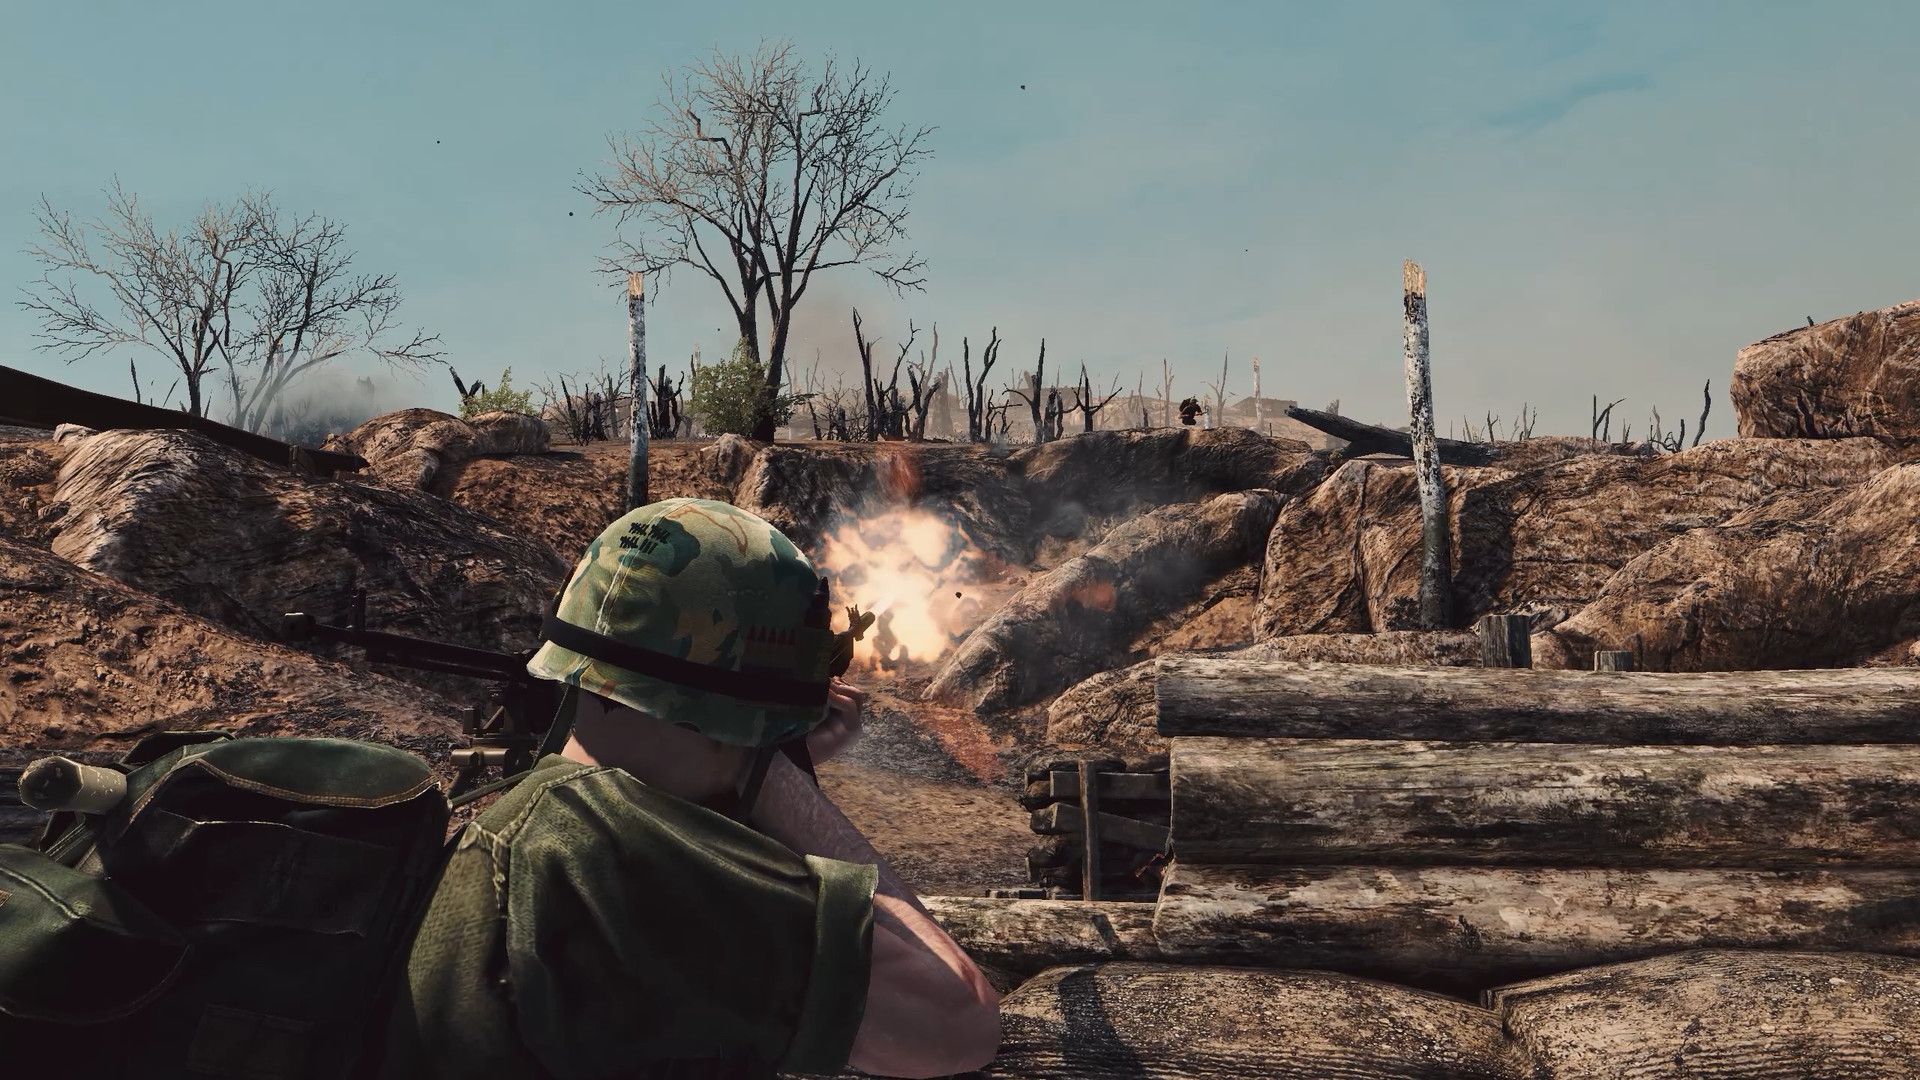 Rising Storm 2: Vietnam Adds 64 Player Campaign That Takes Place Over 11 Battles